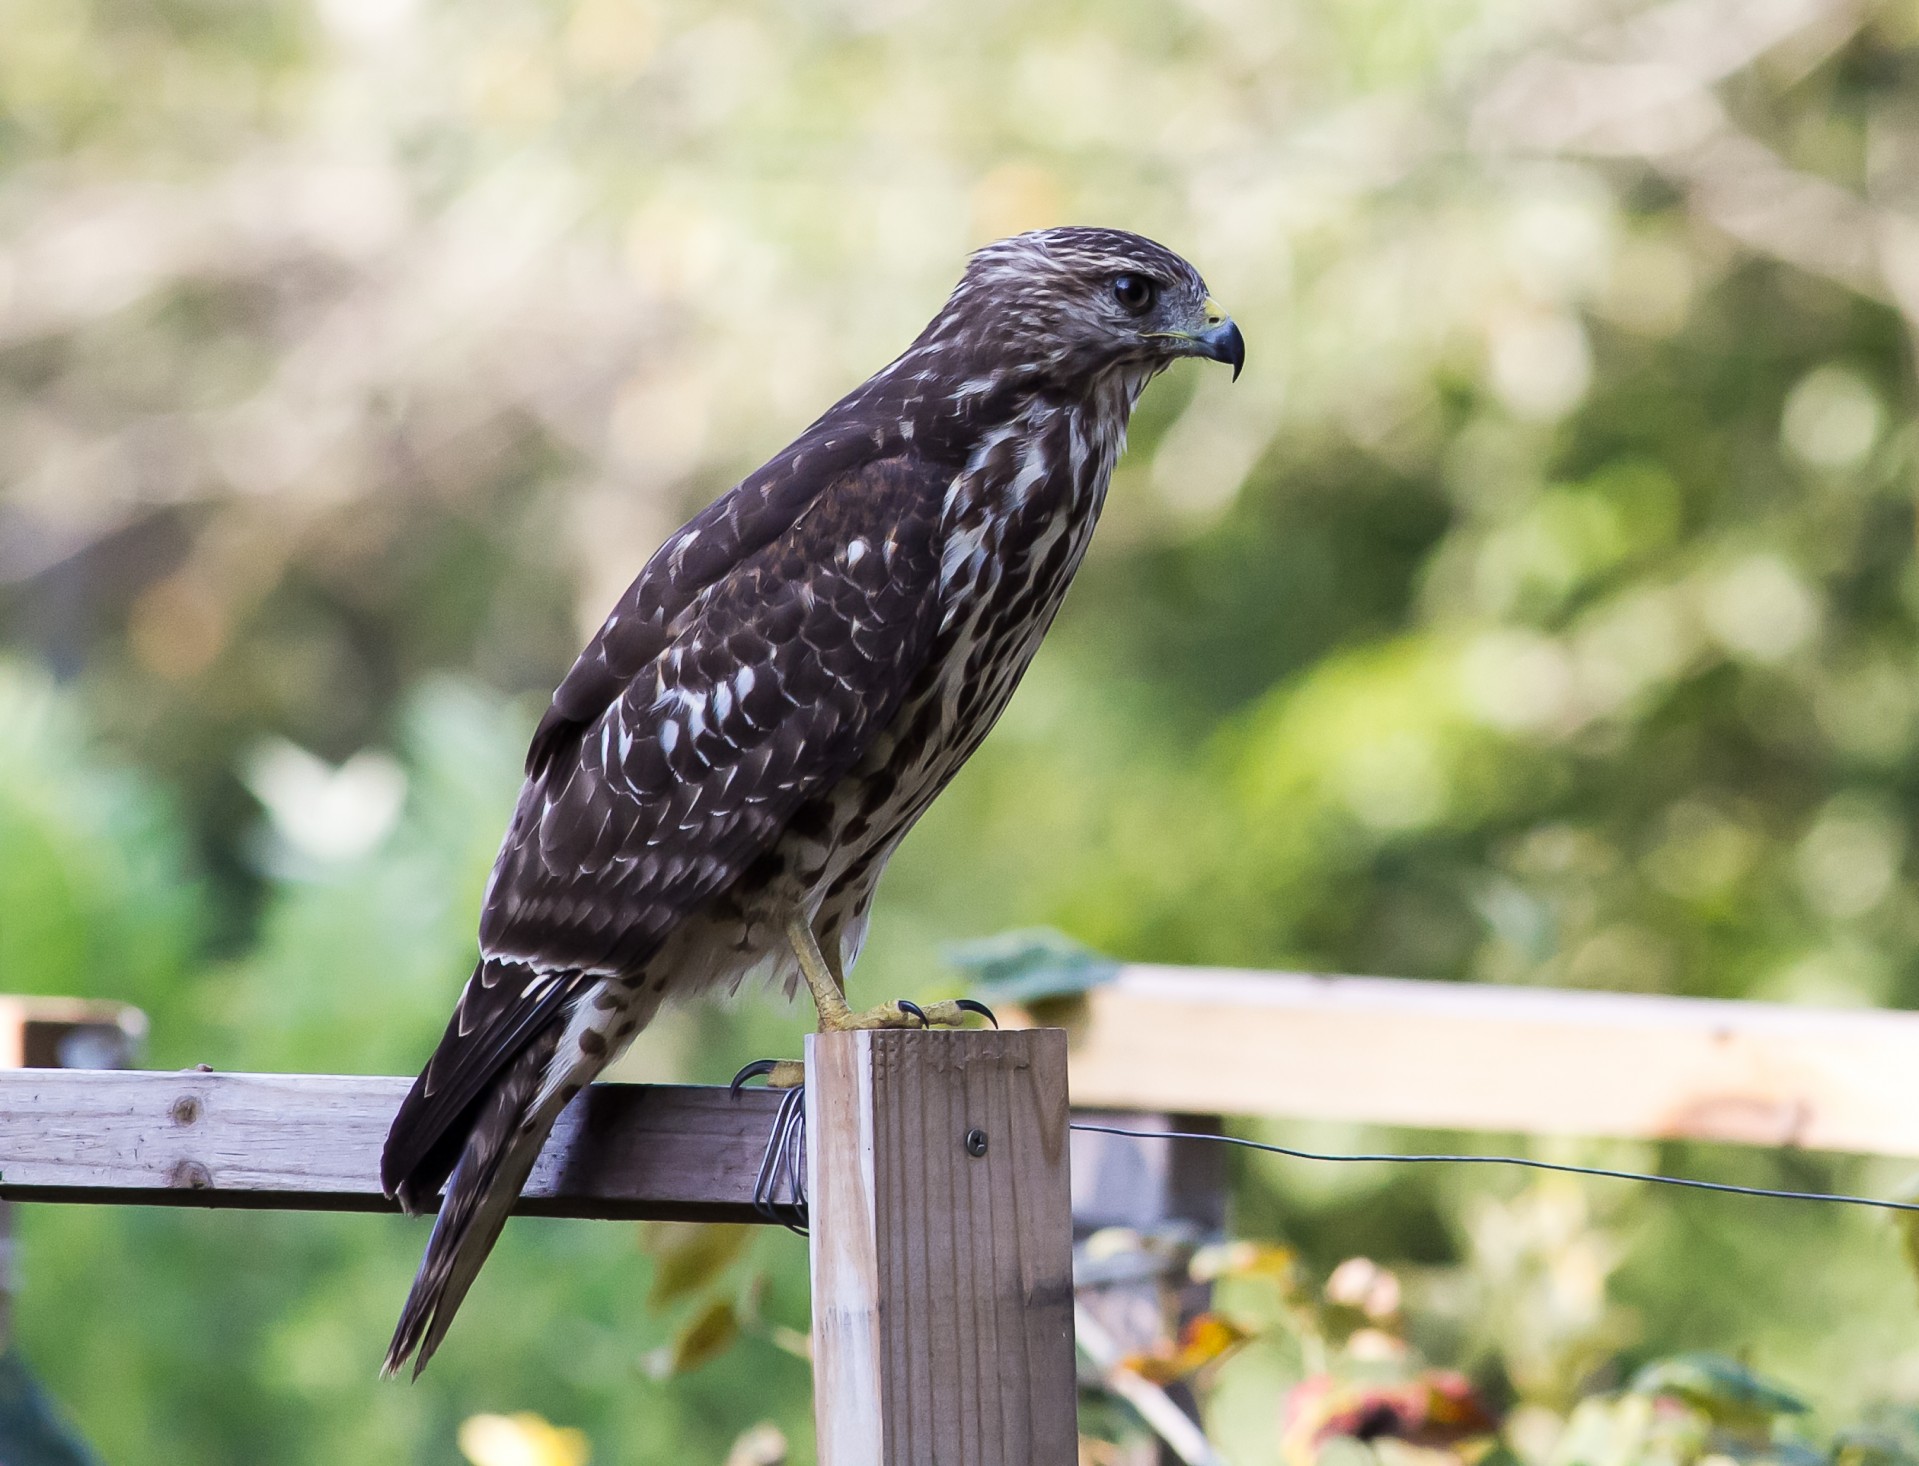 Red-shouldered hawk sitting on a pole